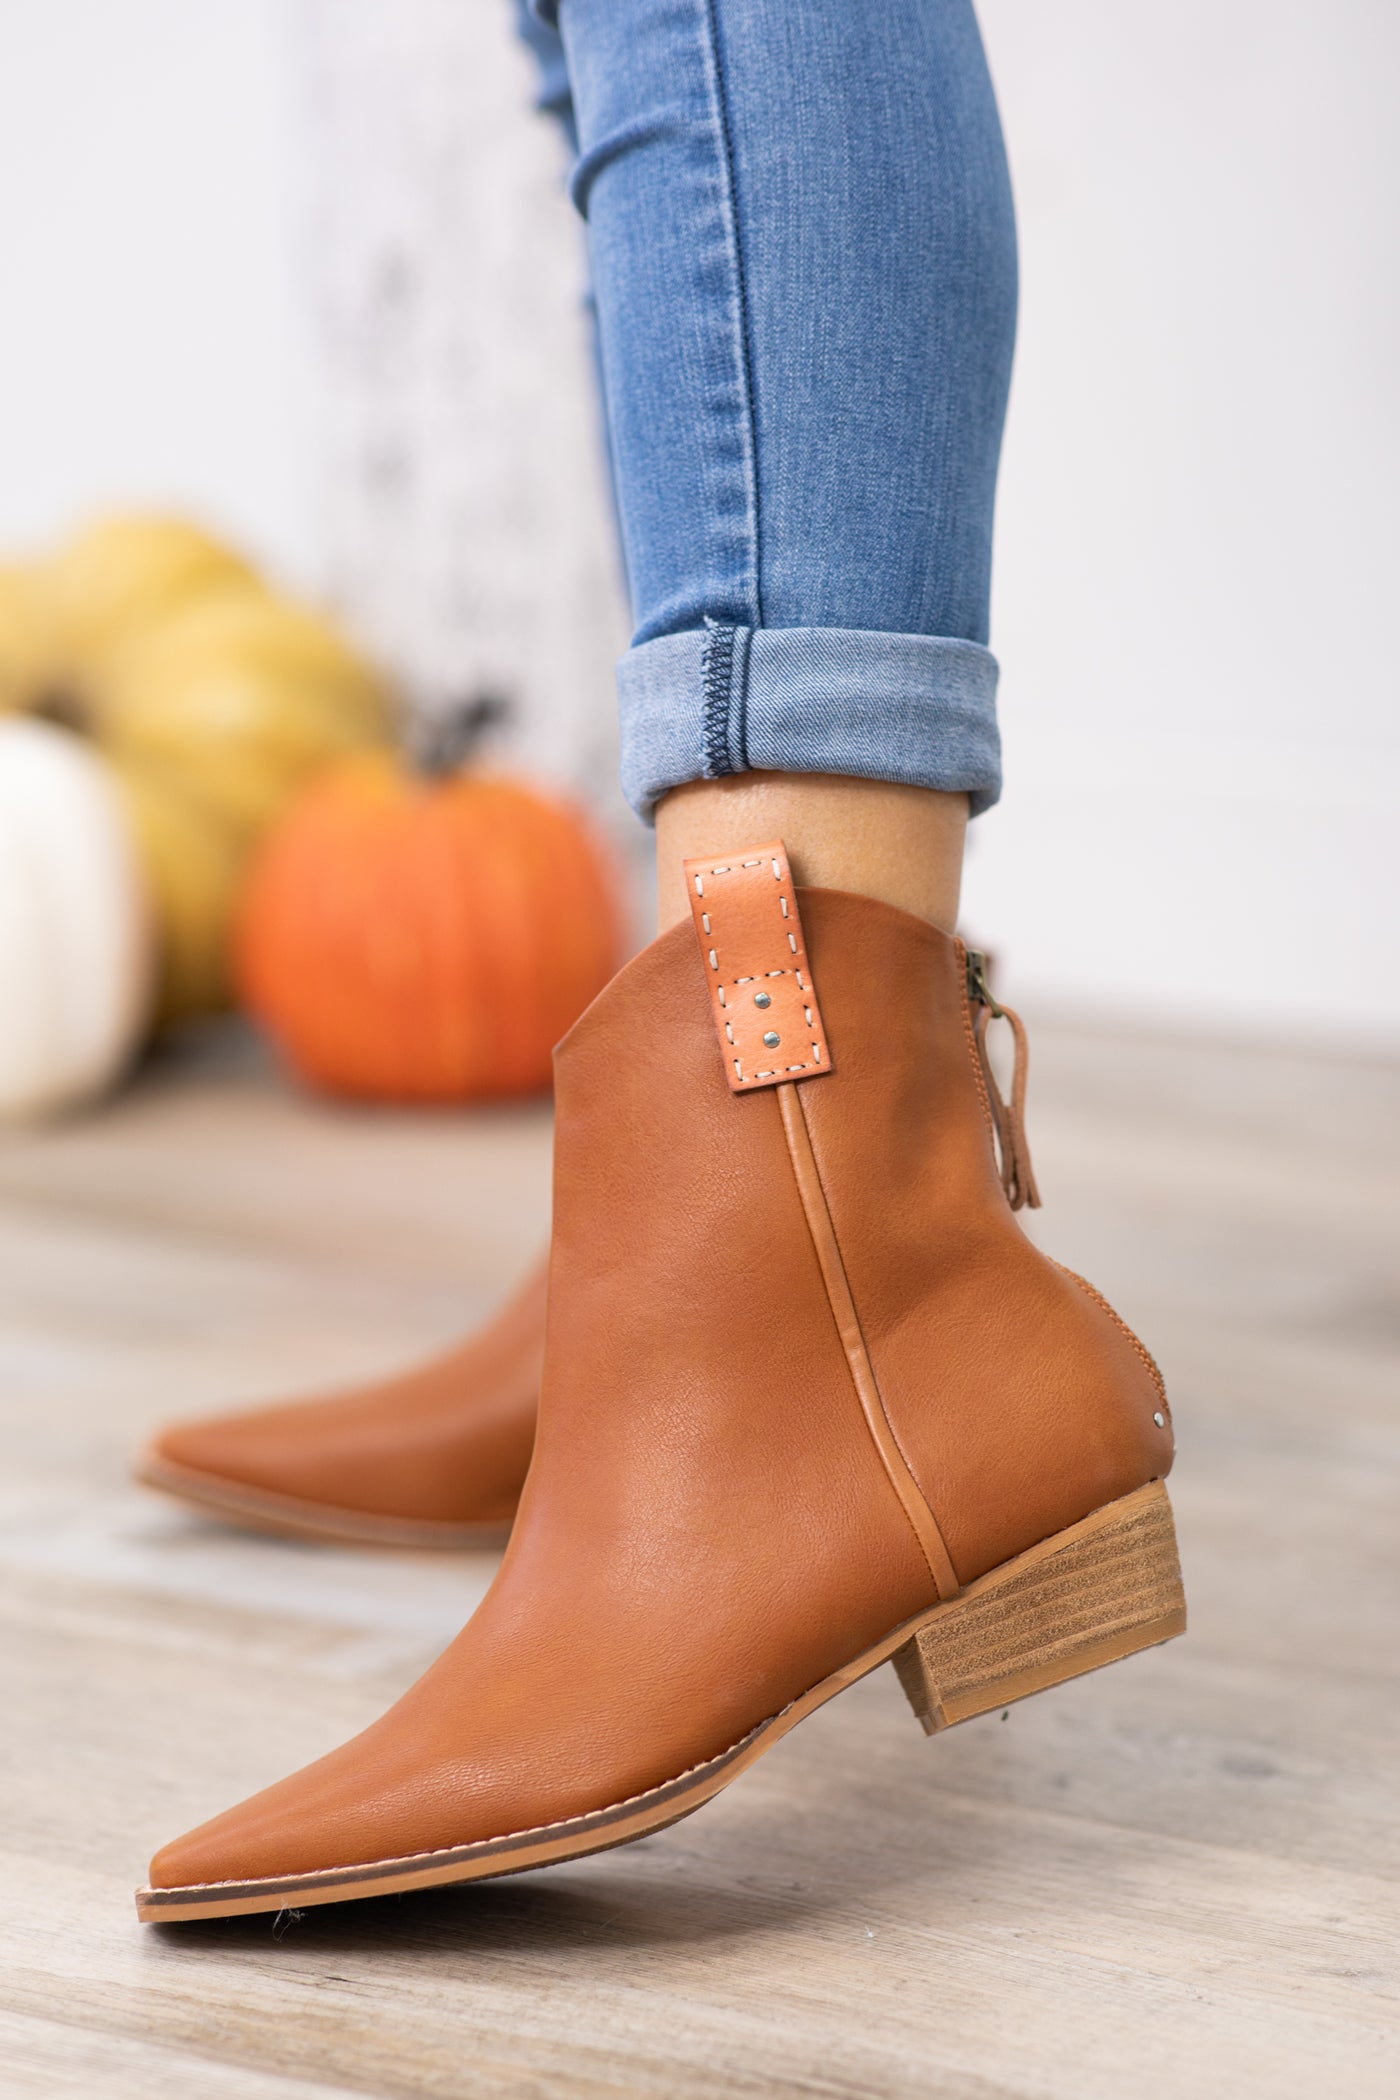 Cognac Point Toe Booties With Contrast Trim